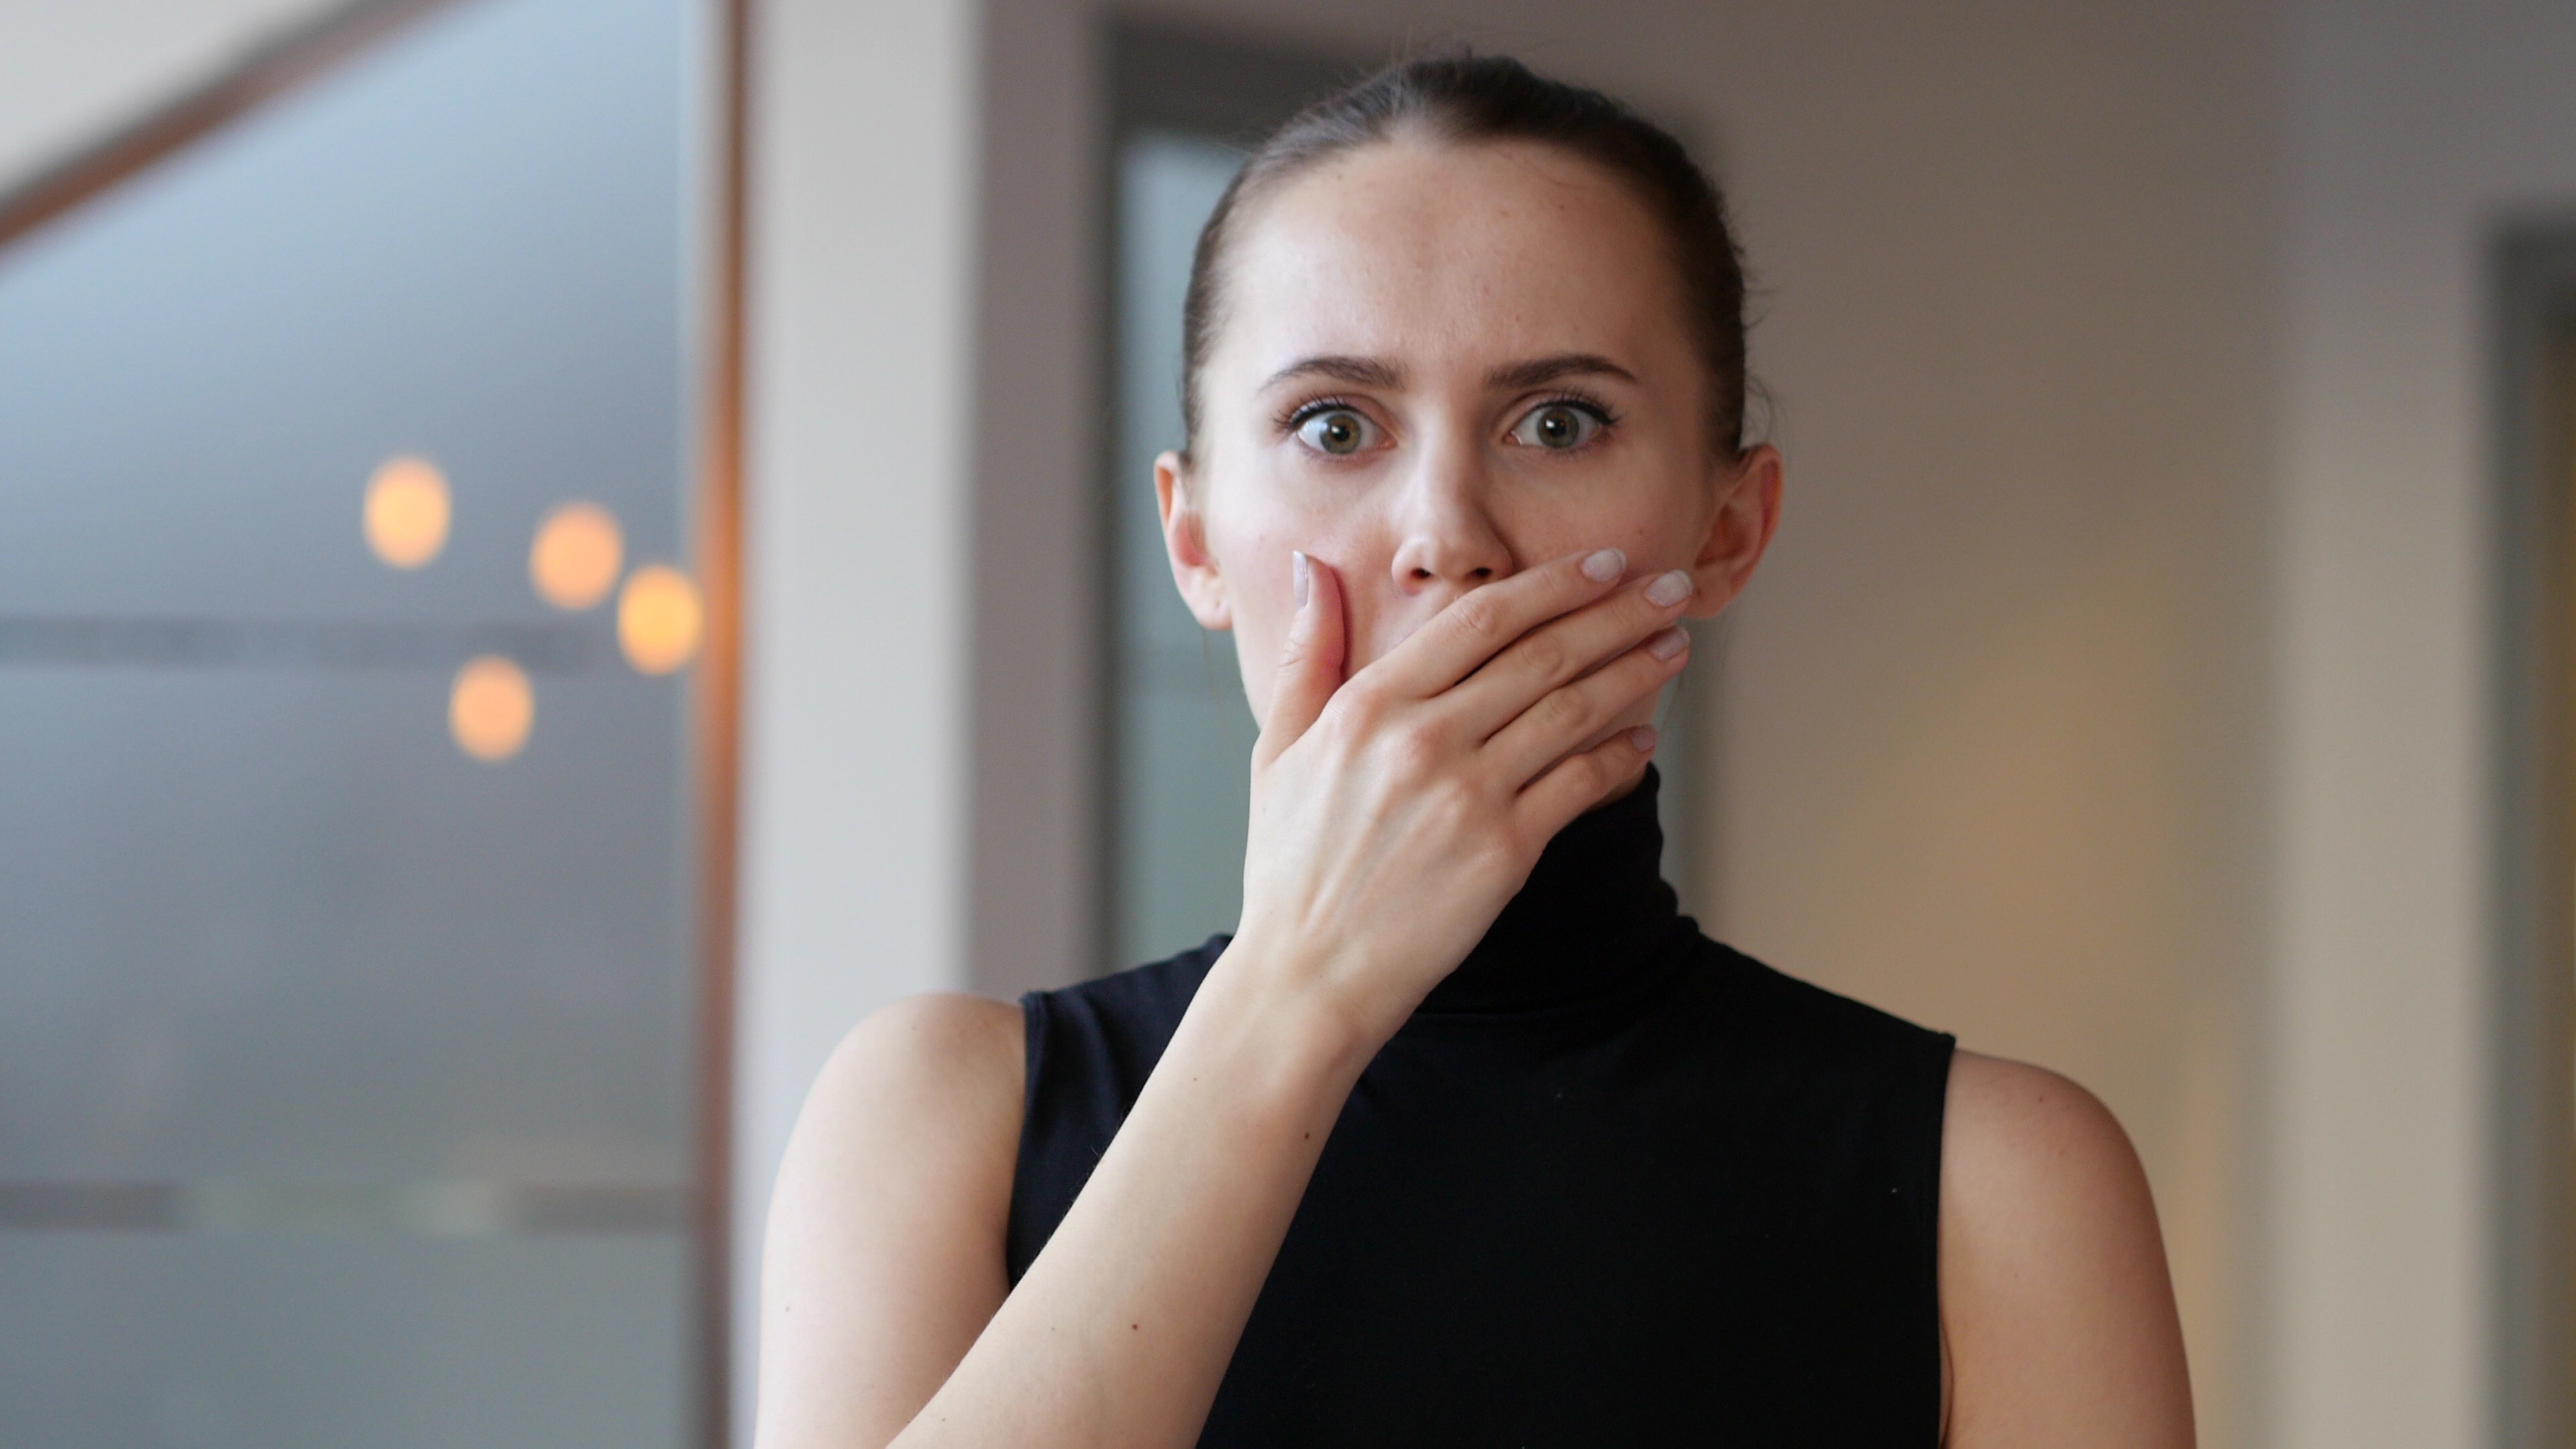 A woman covering her mouth in shock | Source: Shutterstock